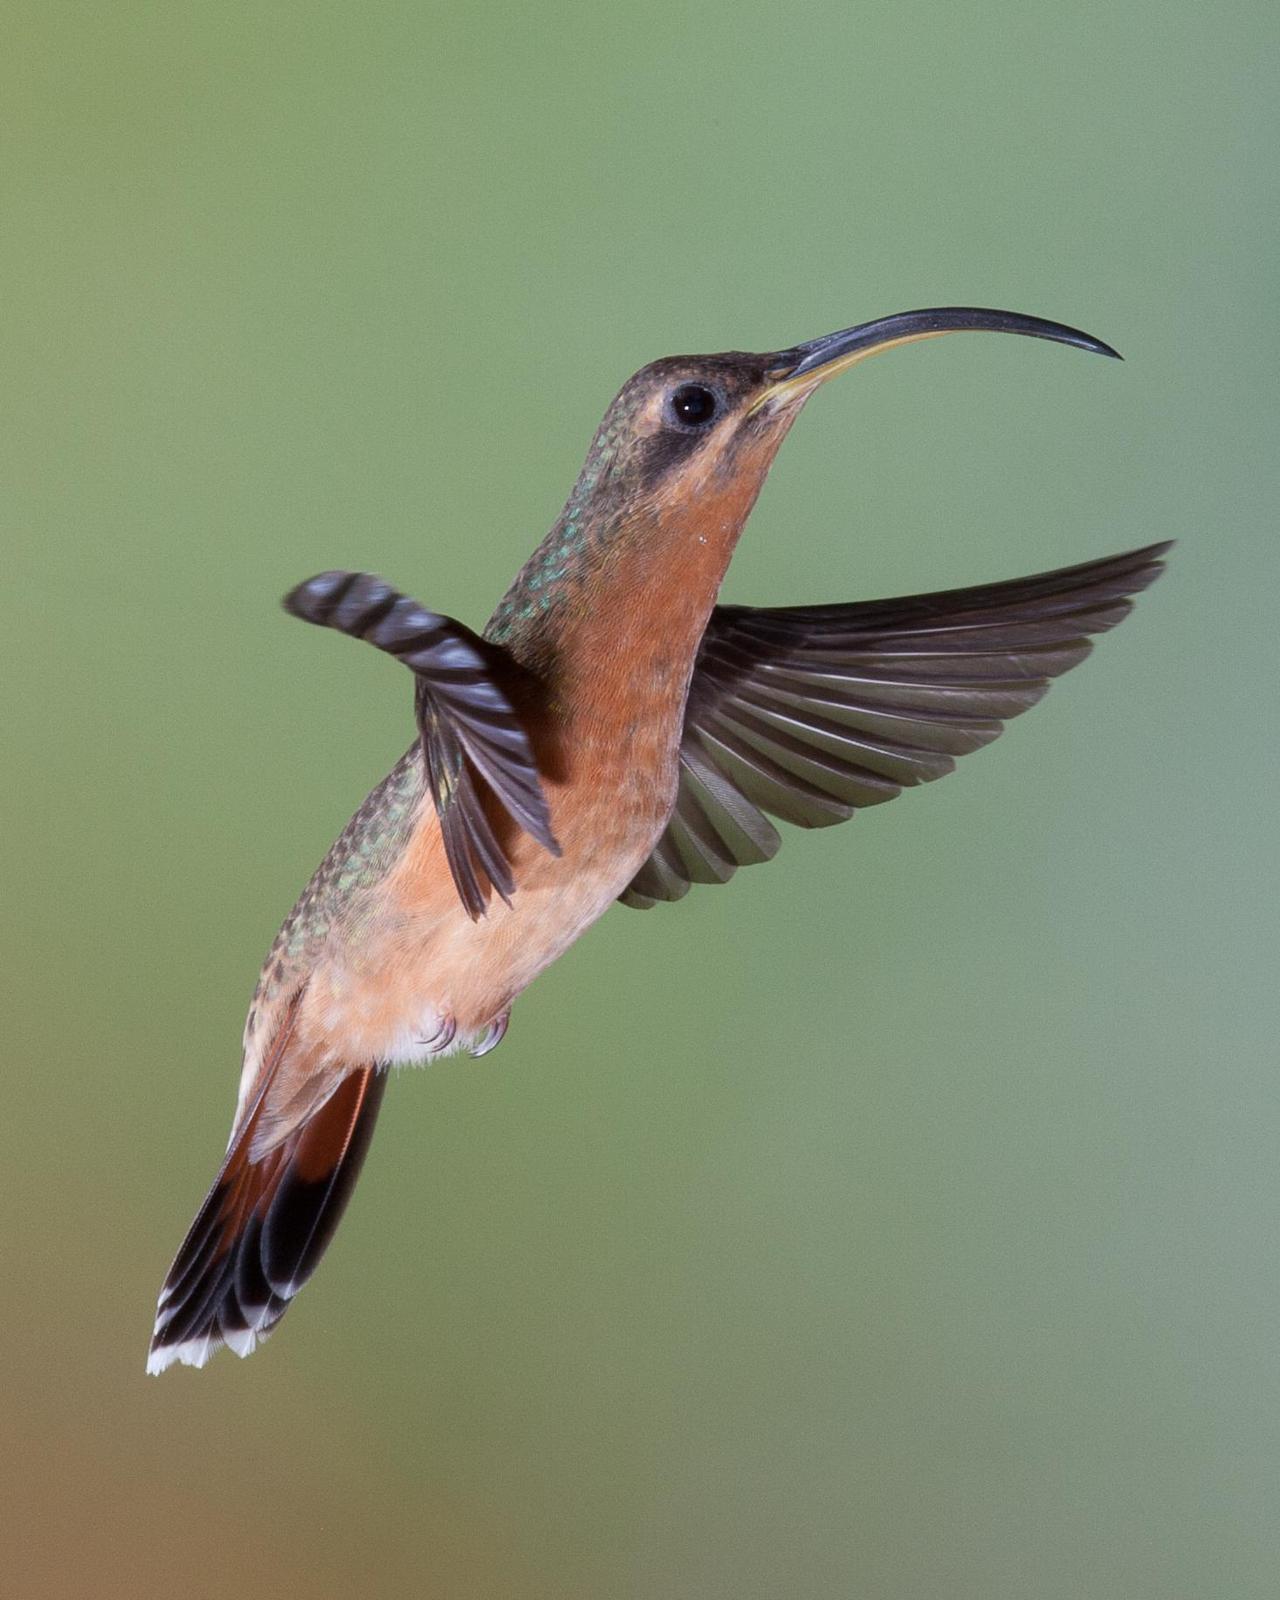 Rufous-breasted Hermit Photo by Robert Lewis